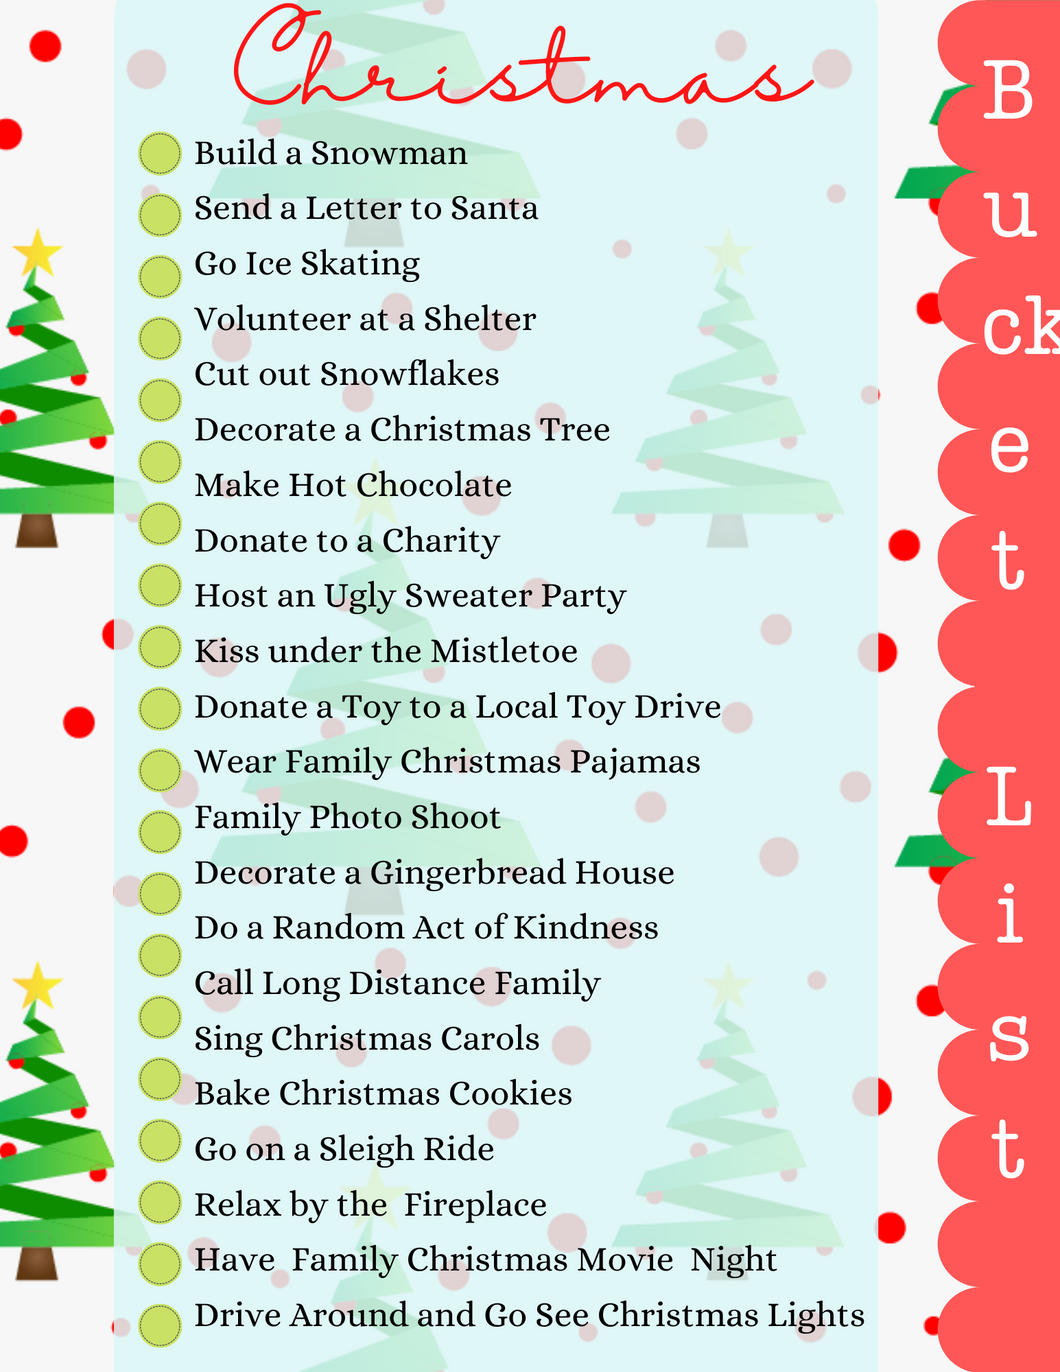 A Christmas Bucket List with a Christmas tree from Wondermom Printables.